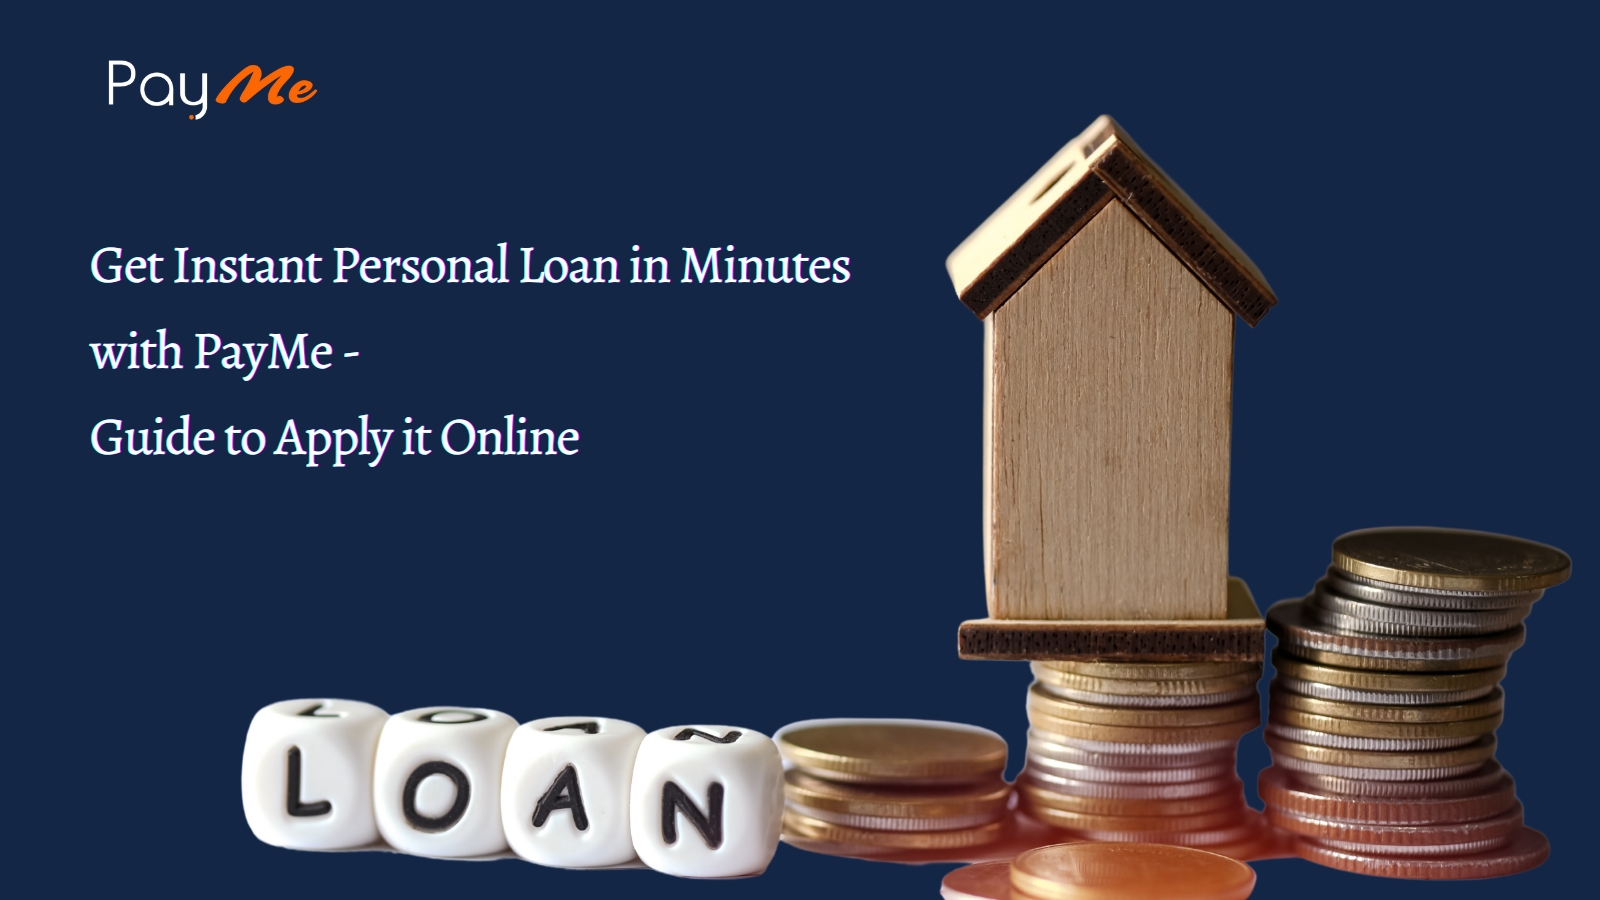 Instant Personal Loan PayME